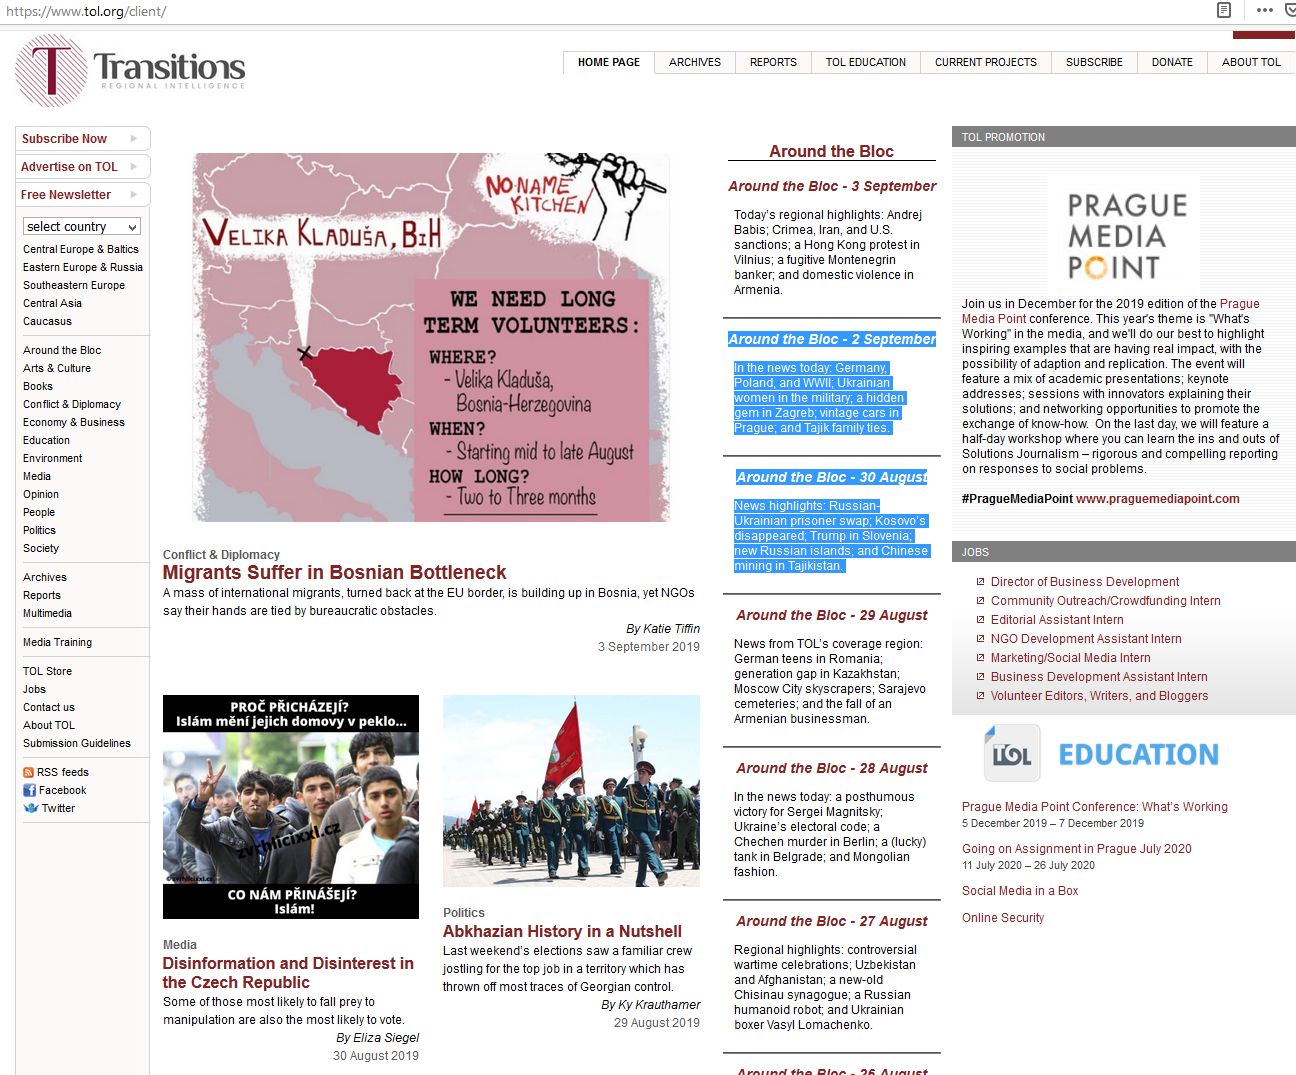 Transitions Online_Media: Disinformation and Disinterest in the Czech Republic – 30 August Cover Image